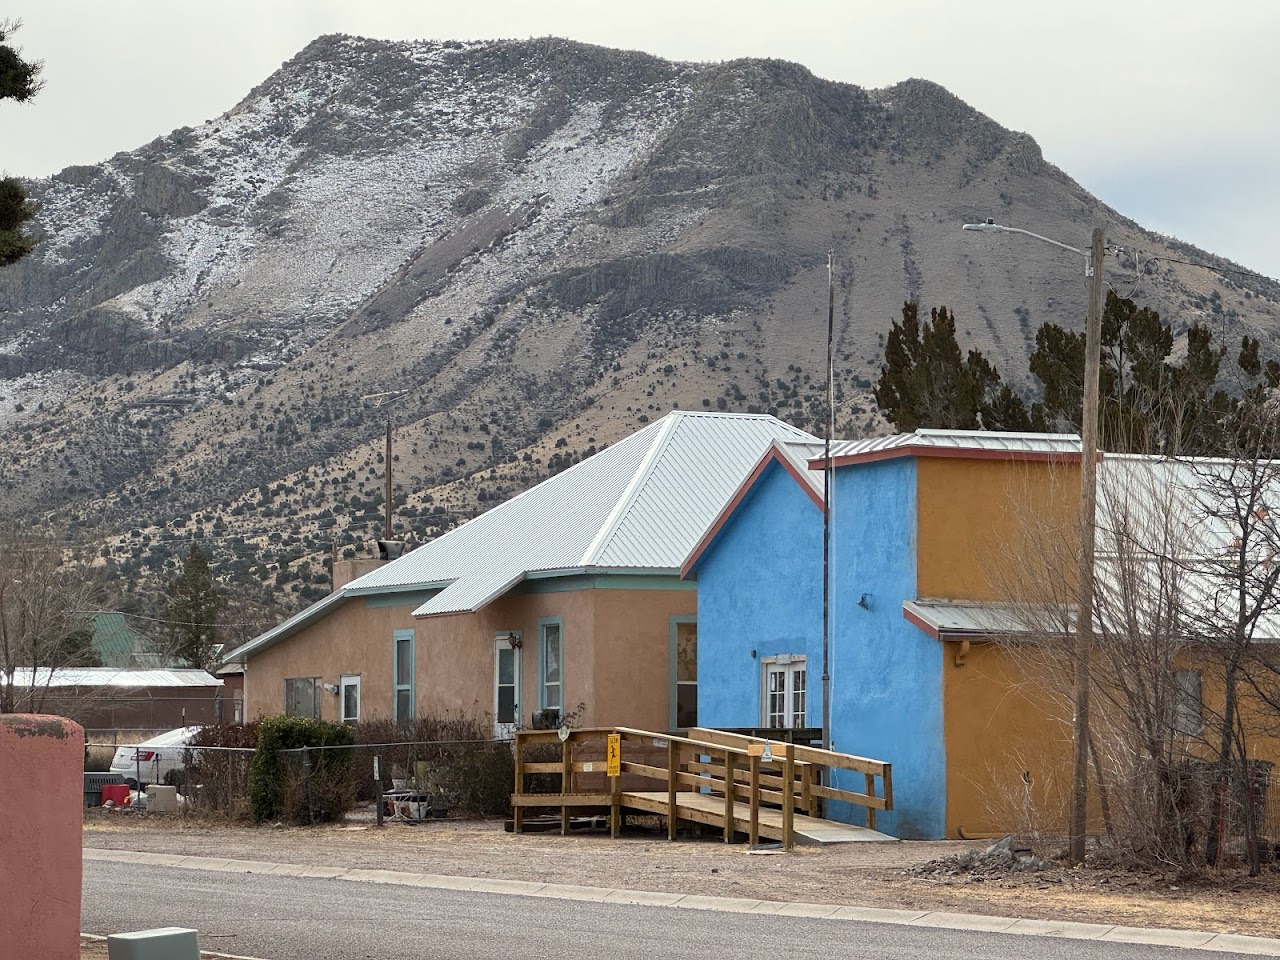 Photo of MAGDALENA HALL HOTEL. Affordable housing located at 404 SECOND ST MAGDALENA, NM 